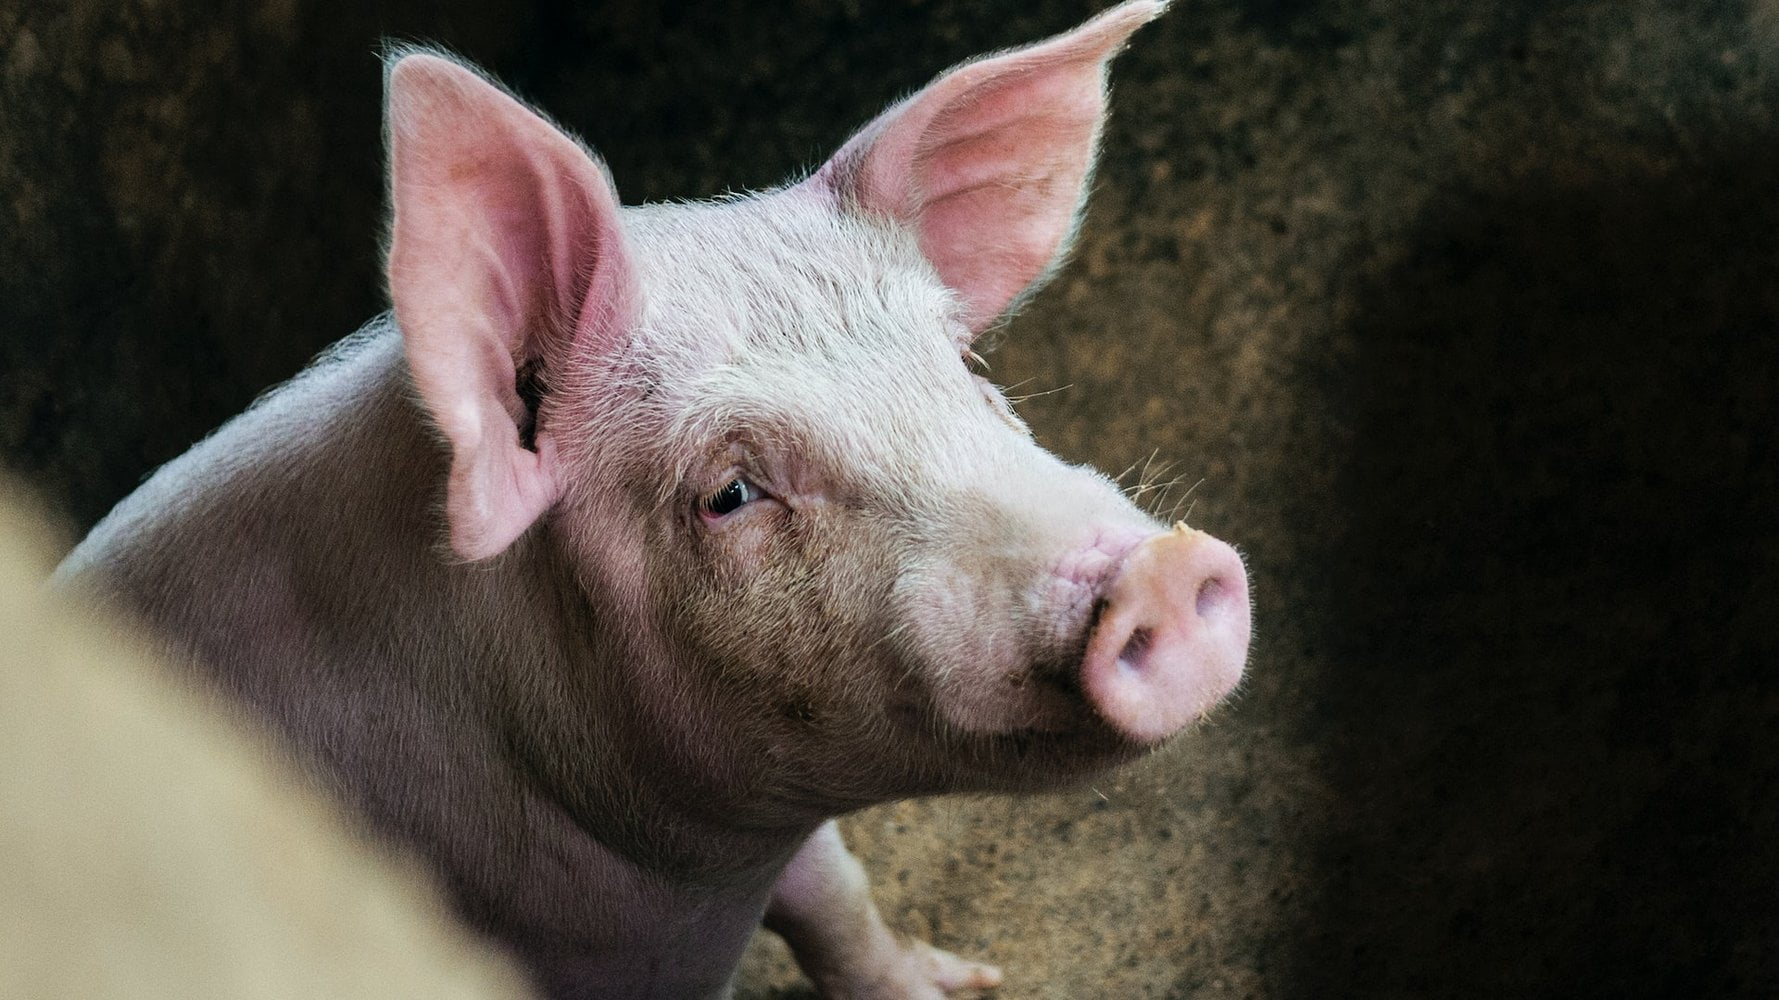 German veterinarians cured aggressive pig from alcoholism